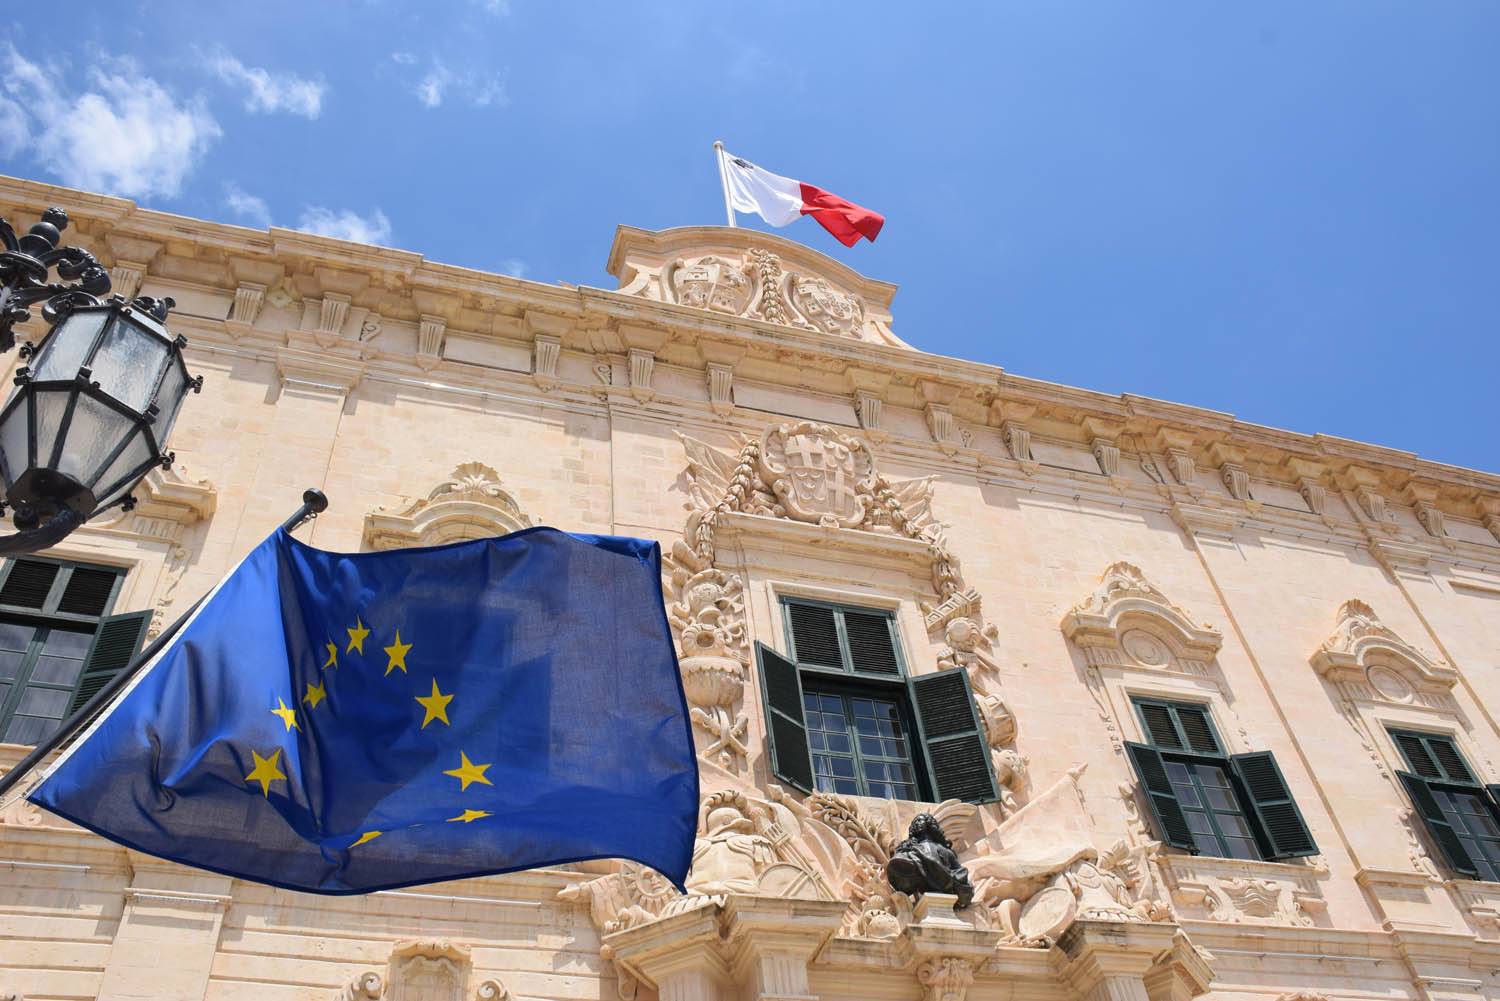 Flag of the European Union and Malta at the Prime Minister's Palace in Valletta